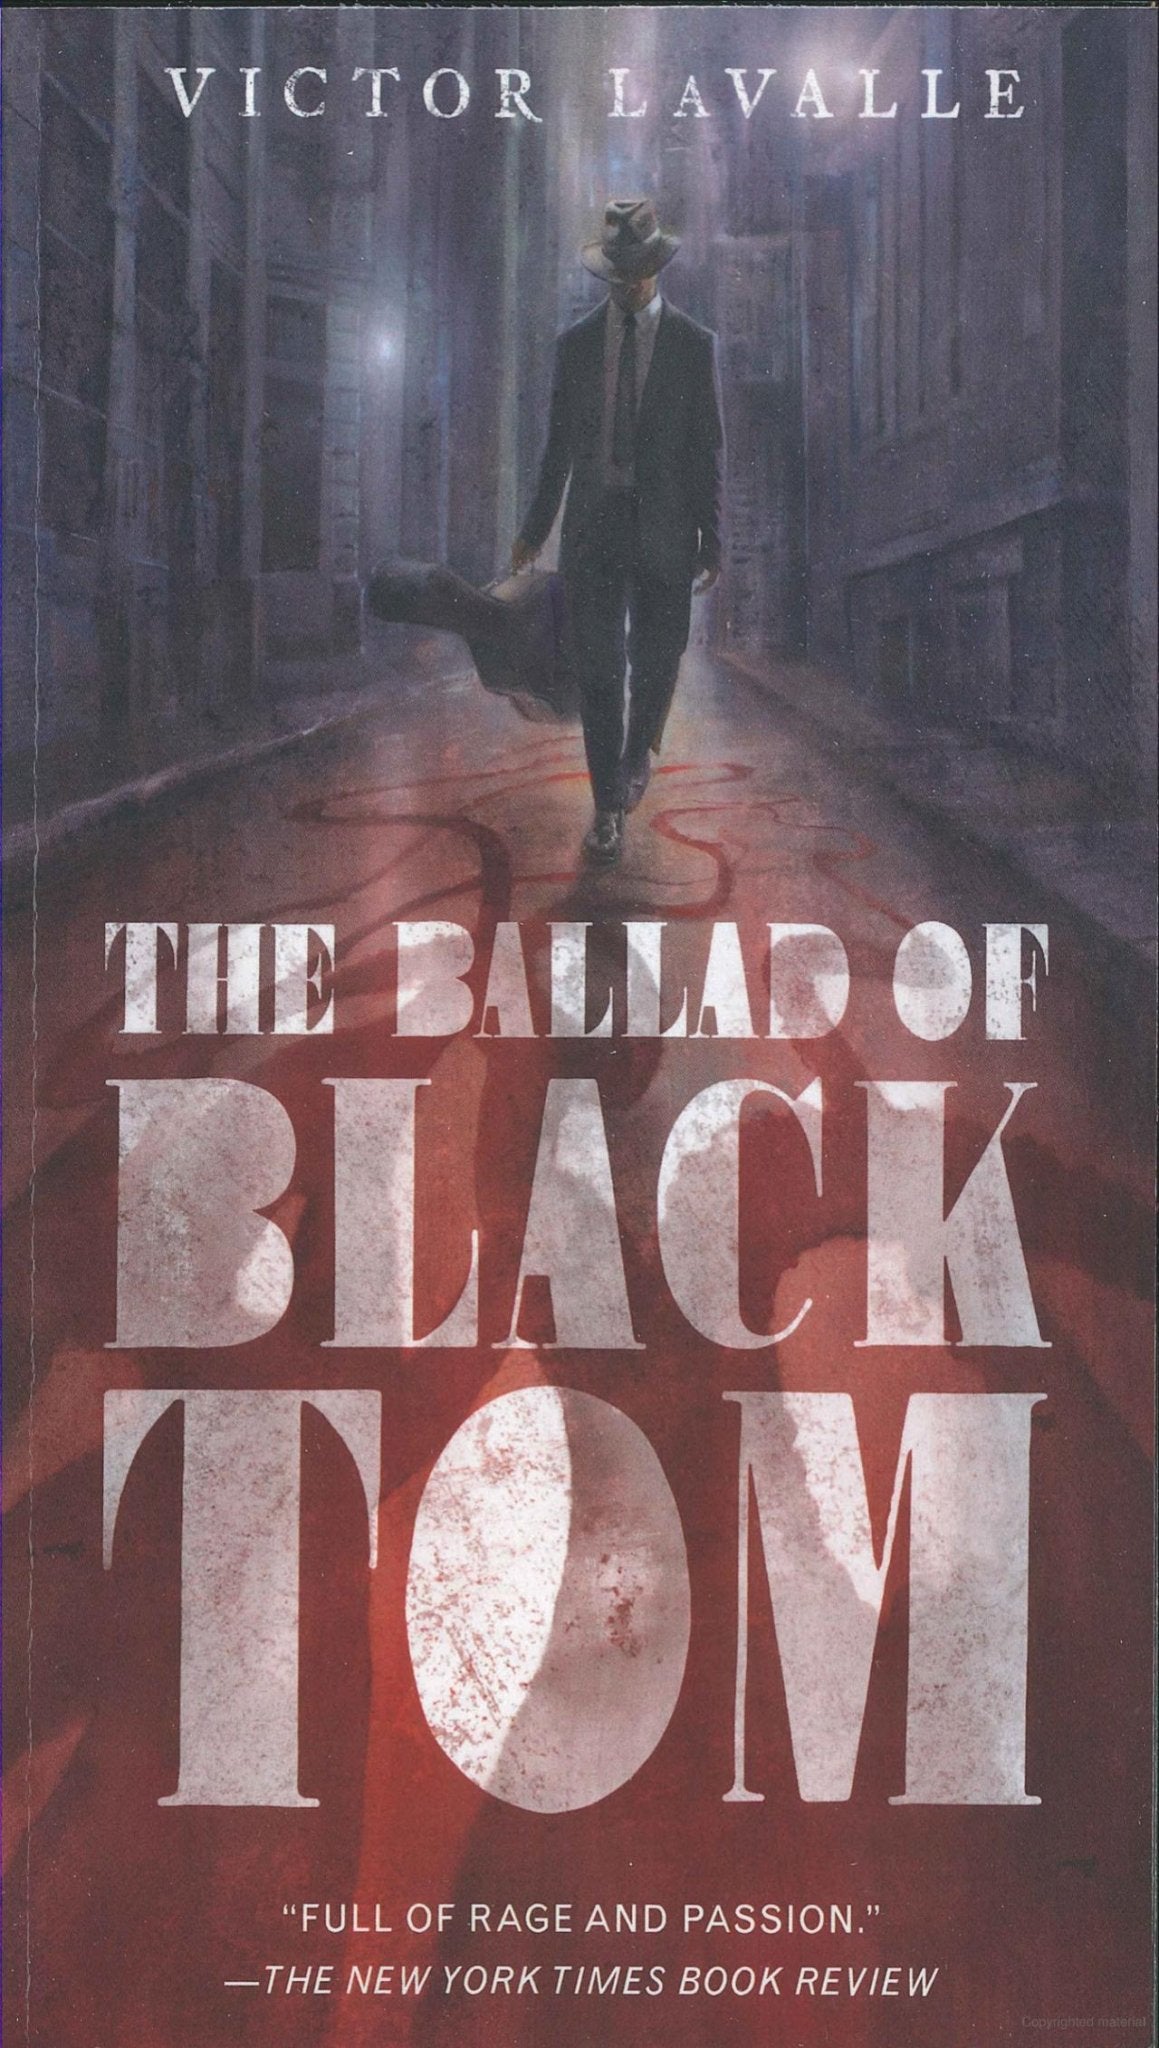 The Ballad of Black Tom -Victor LaValle - The Society for Unusual Books